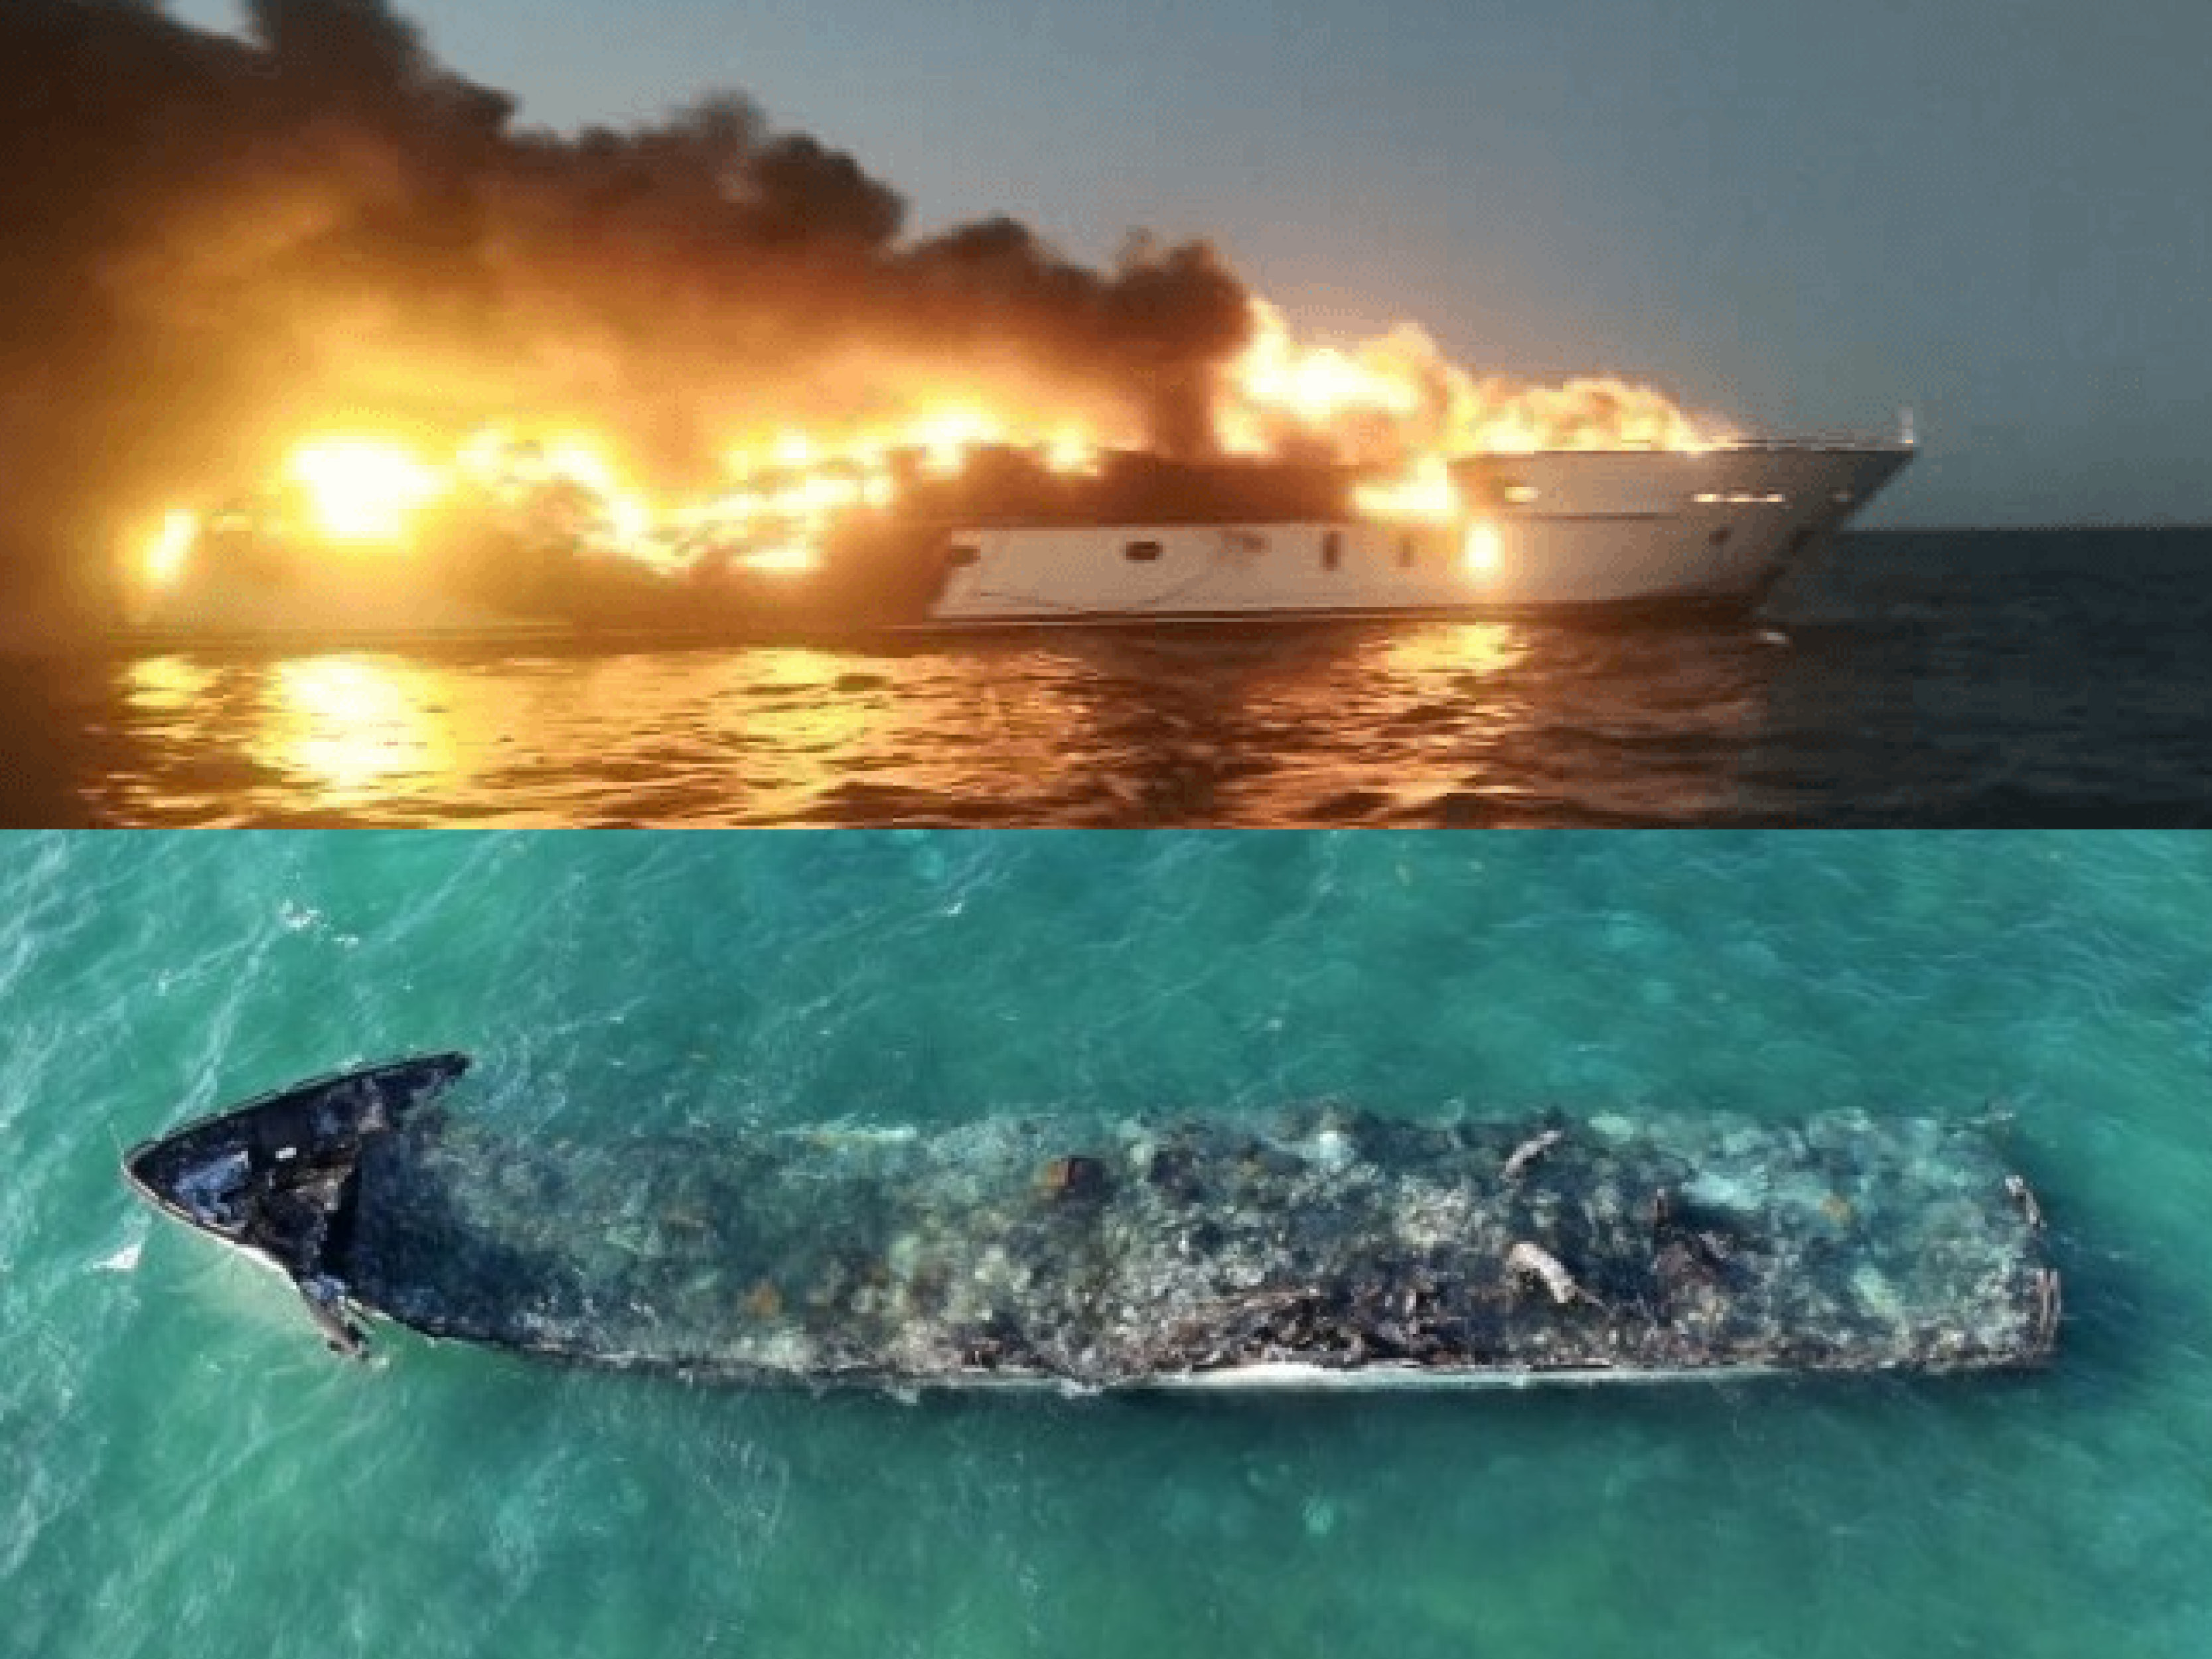 yacht on fire today